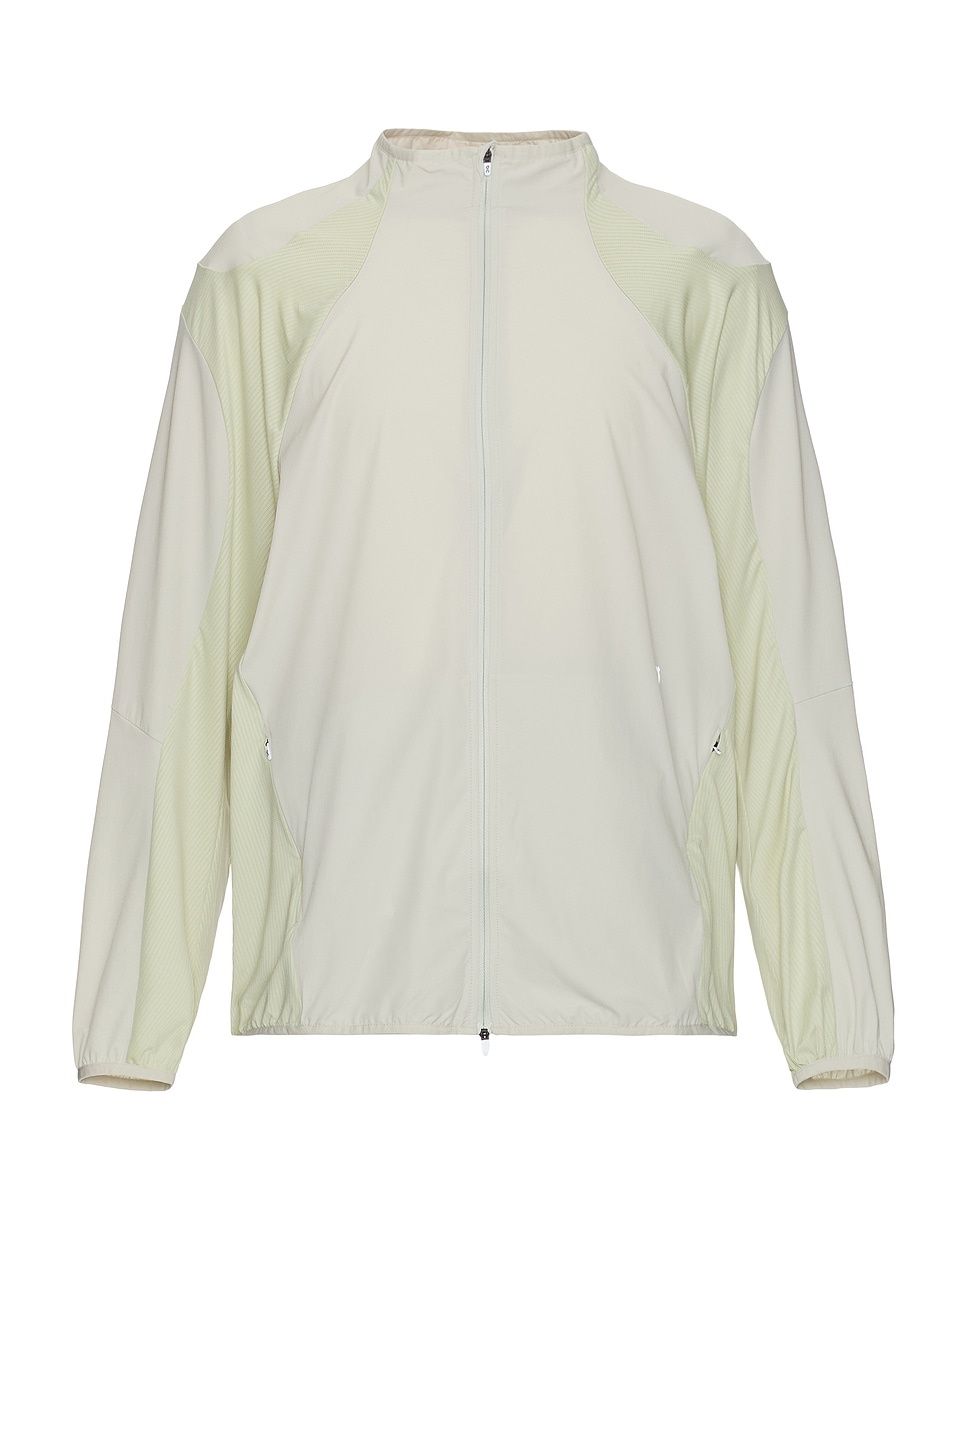 x Post Archive Faction (PAF) Running Jacket - 1